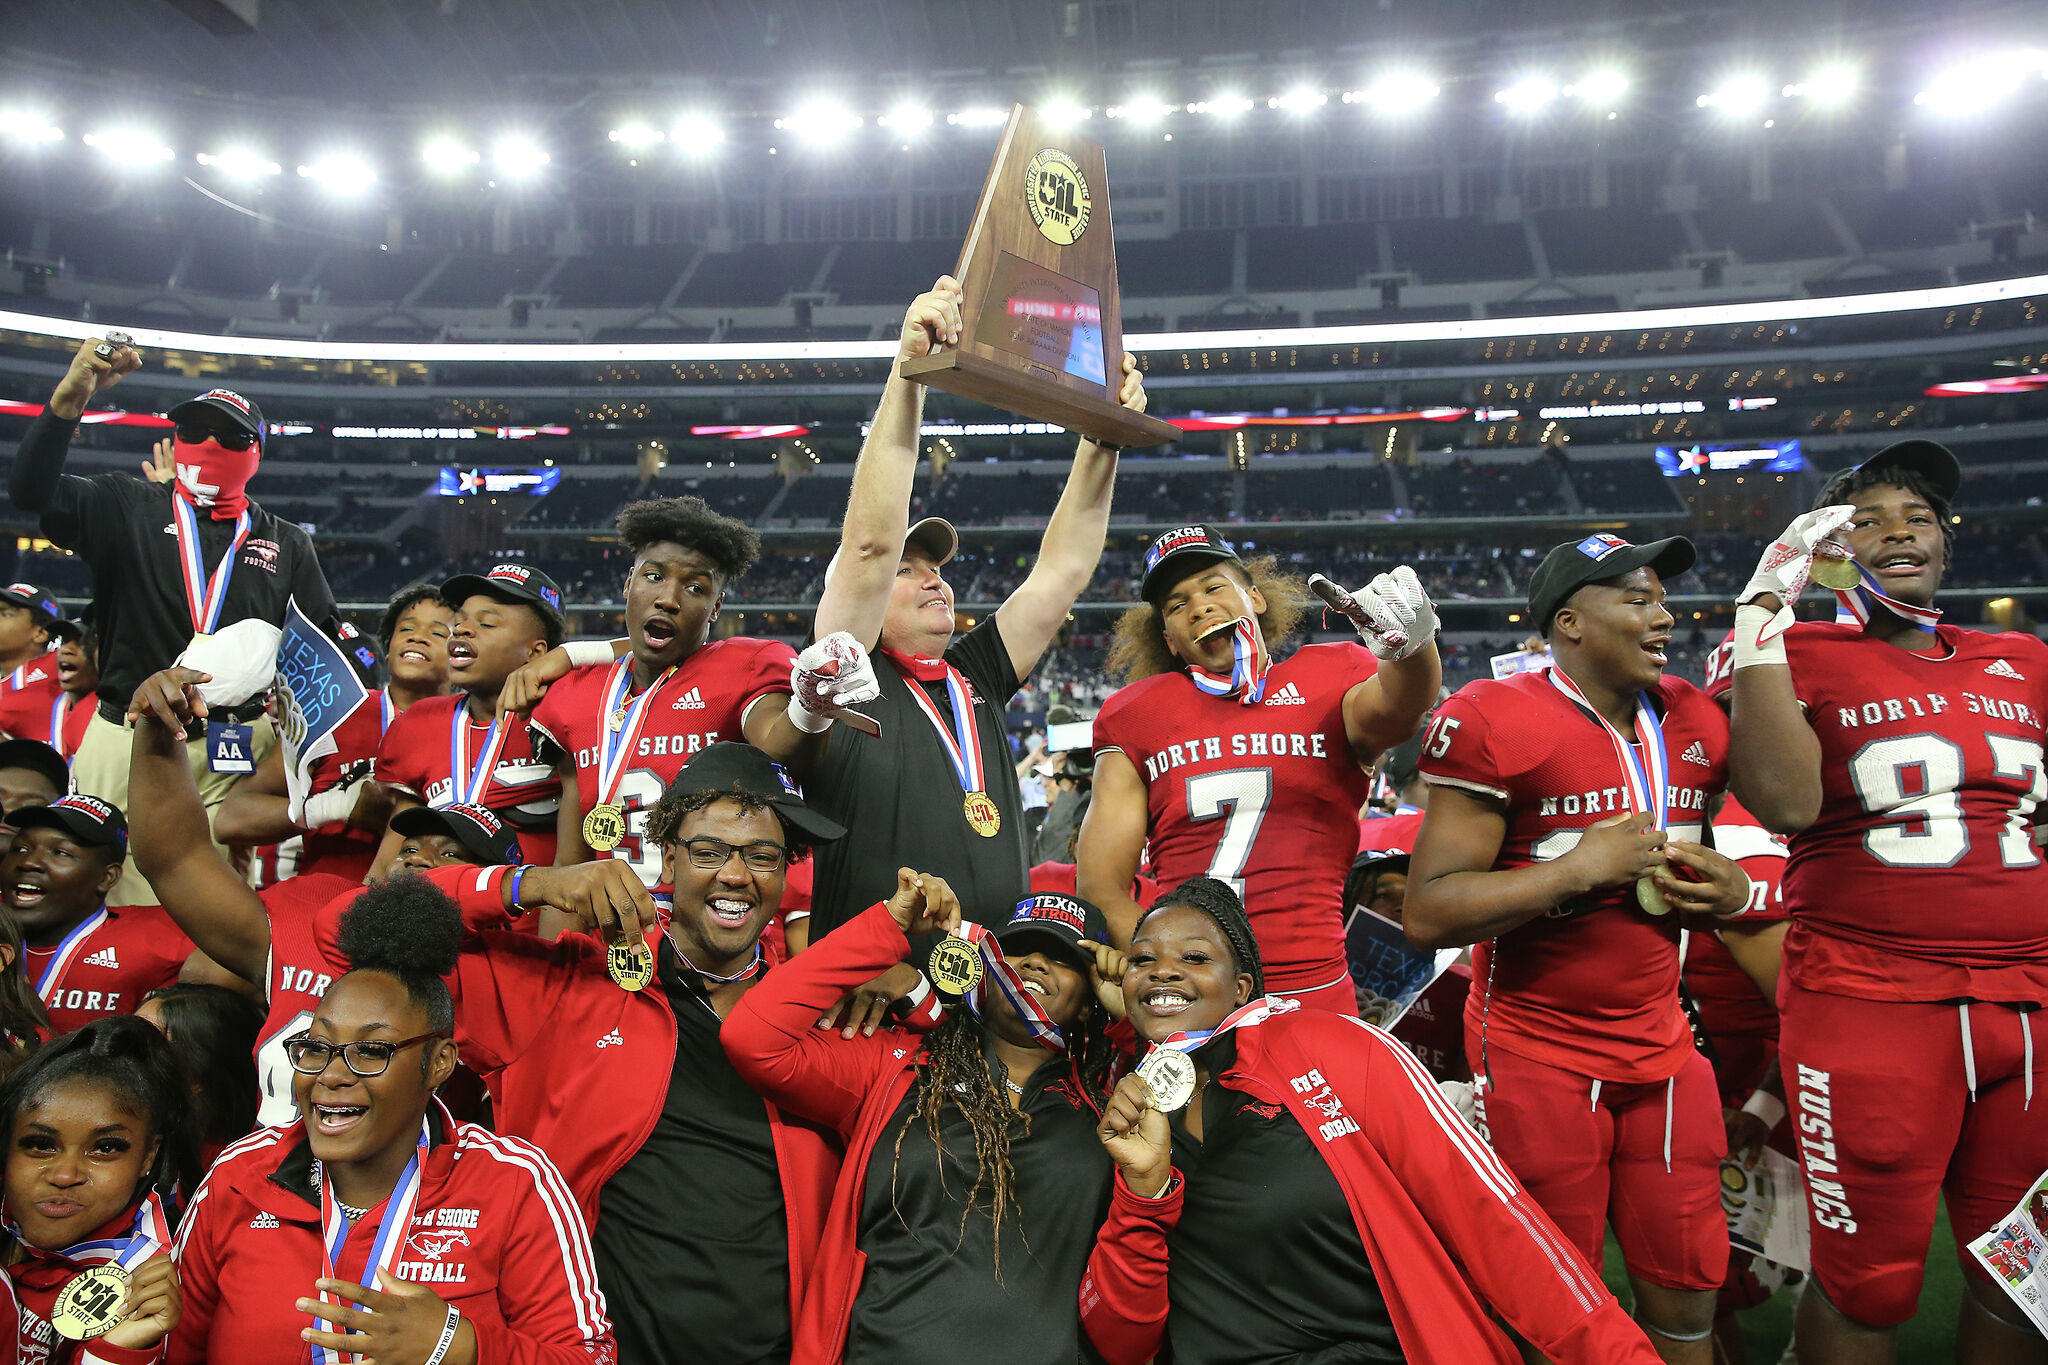 Why North Shore-Duncanville rivalry is good for HS football